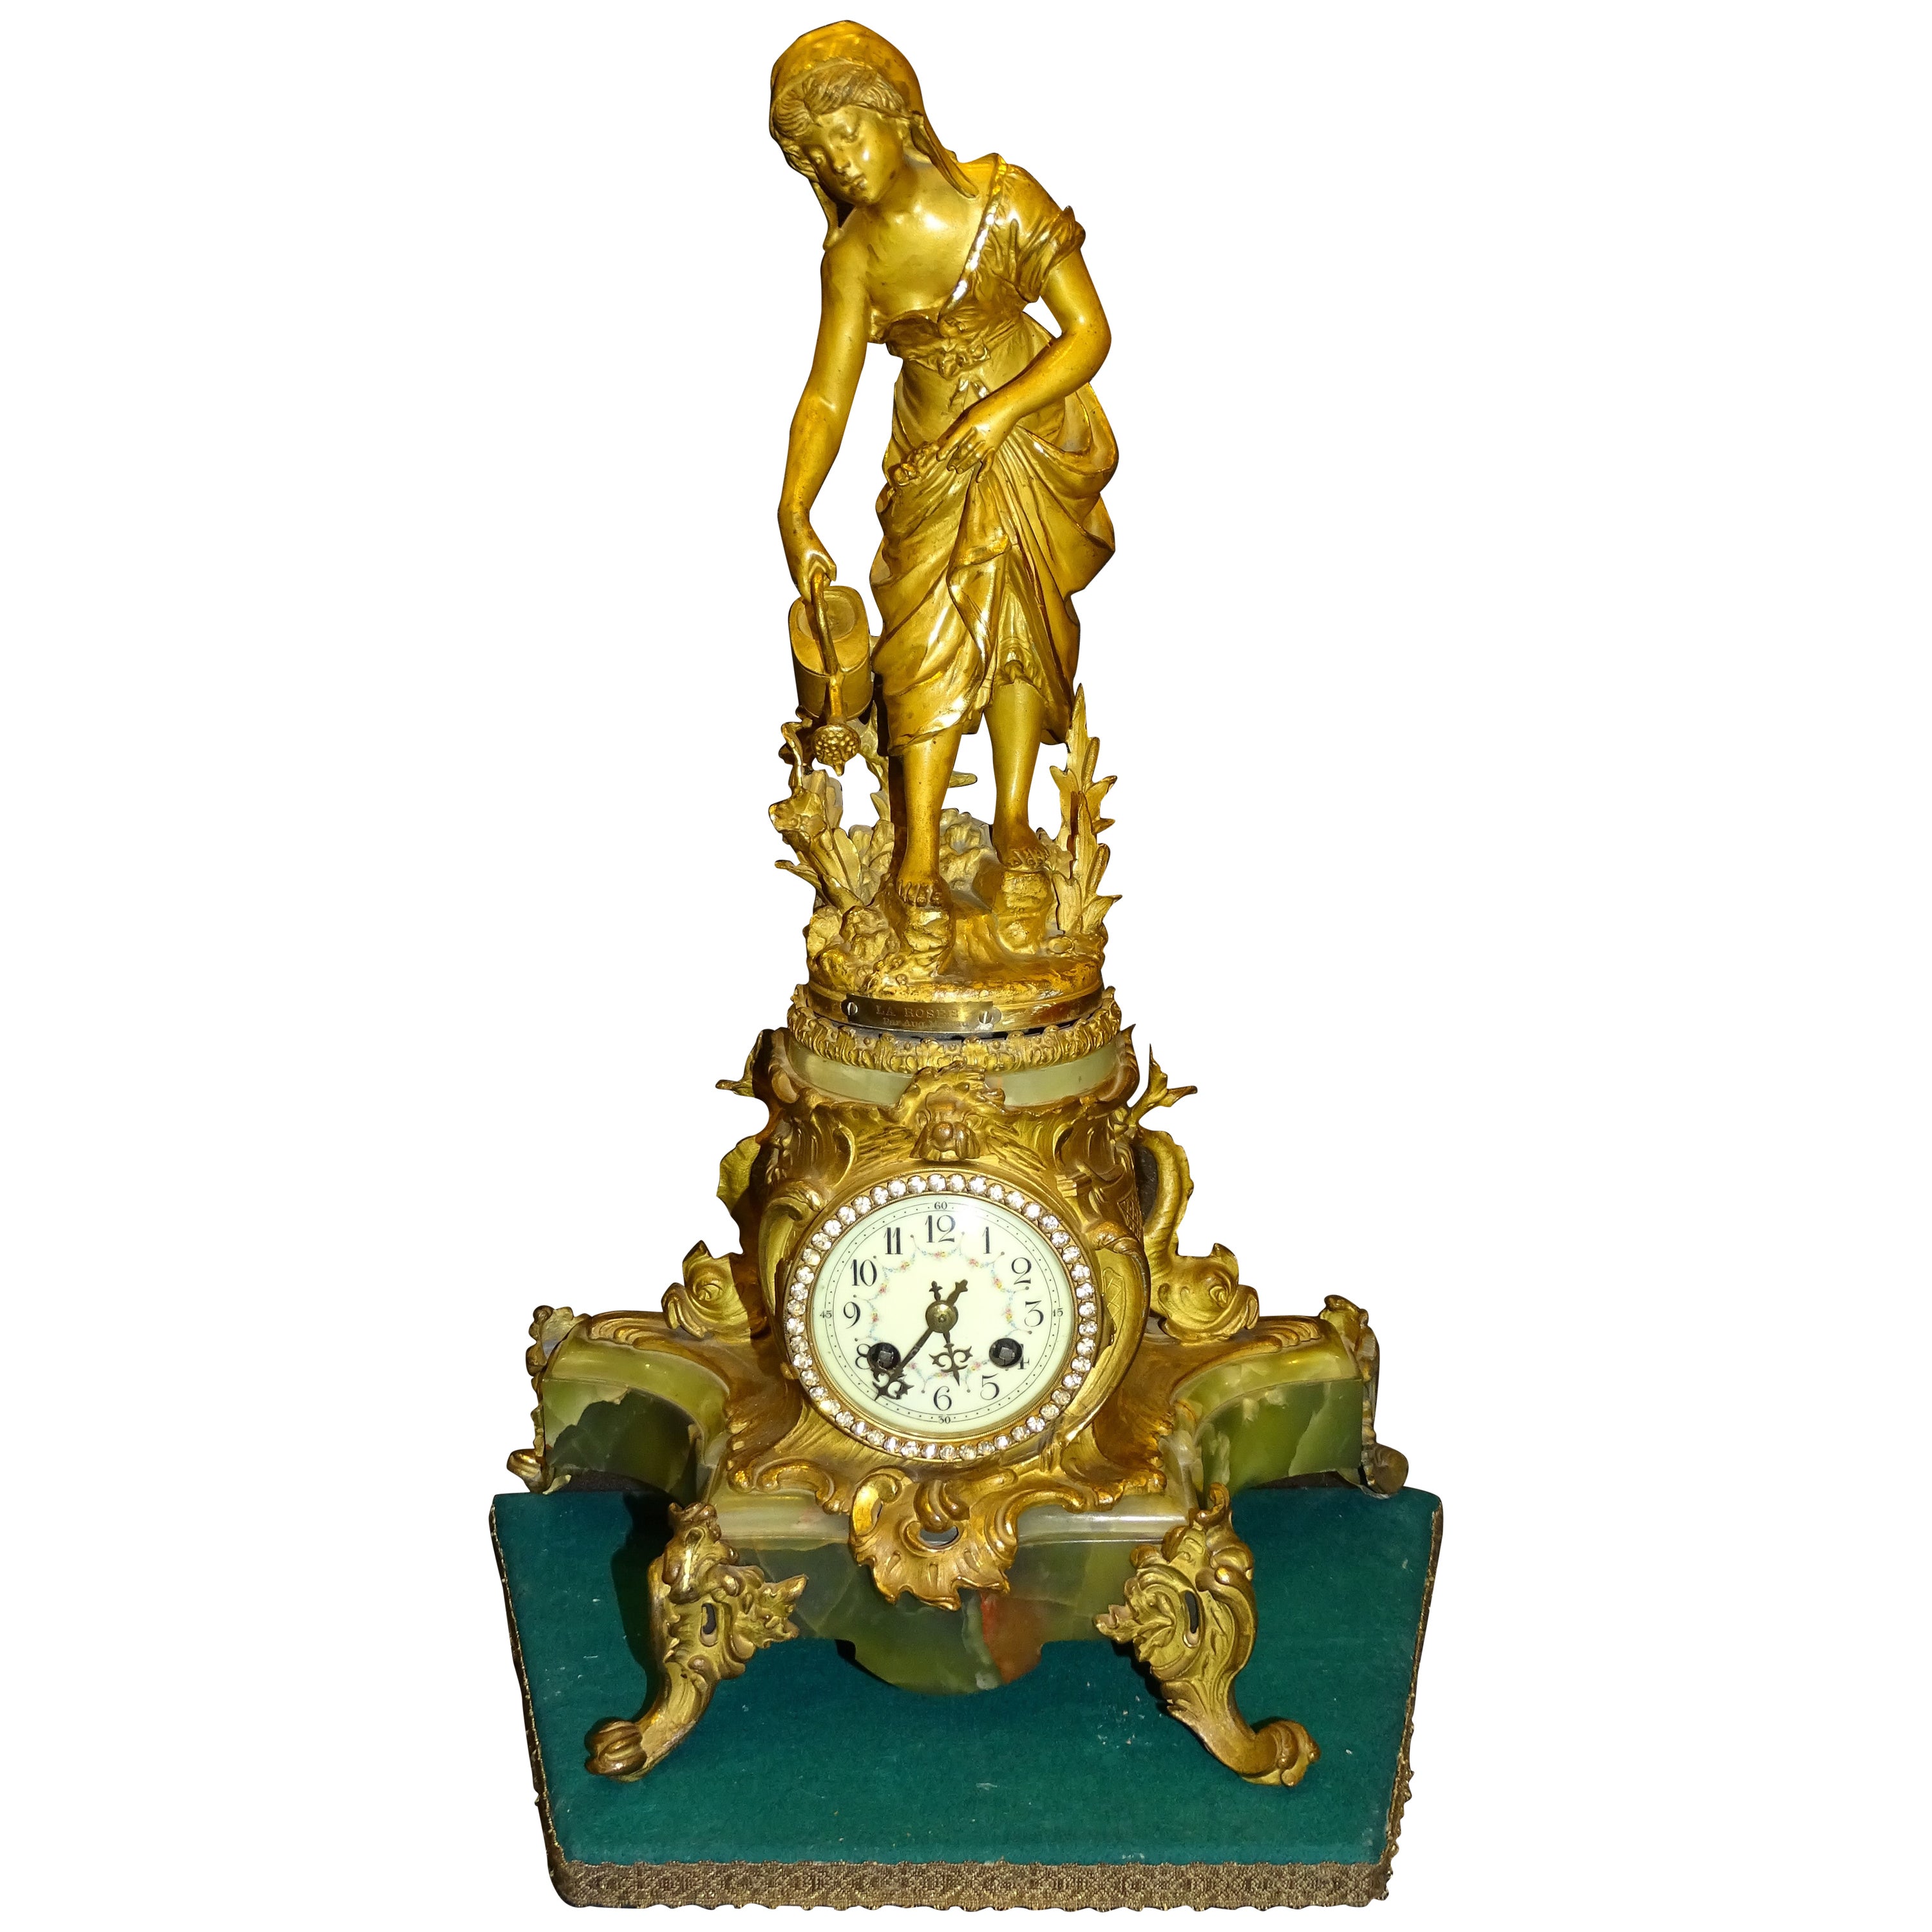 19thcenturyfrench Mantelclock Sculpture Moureau, Bronce and Marble